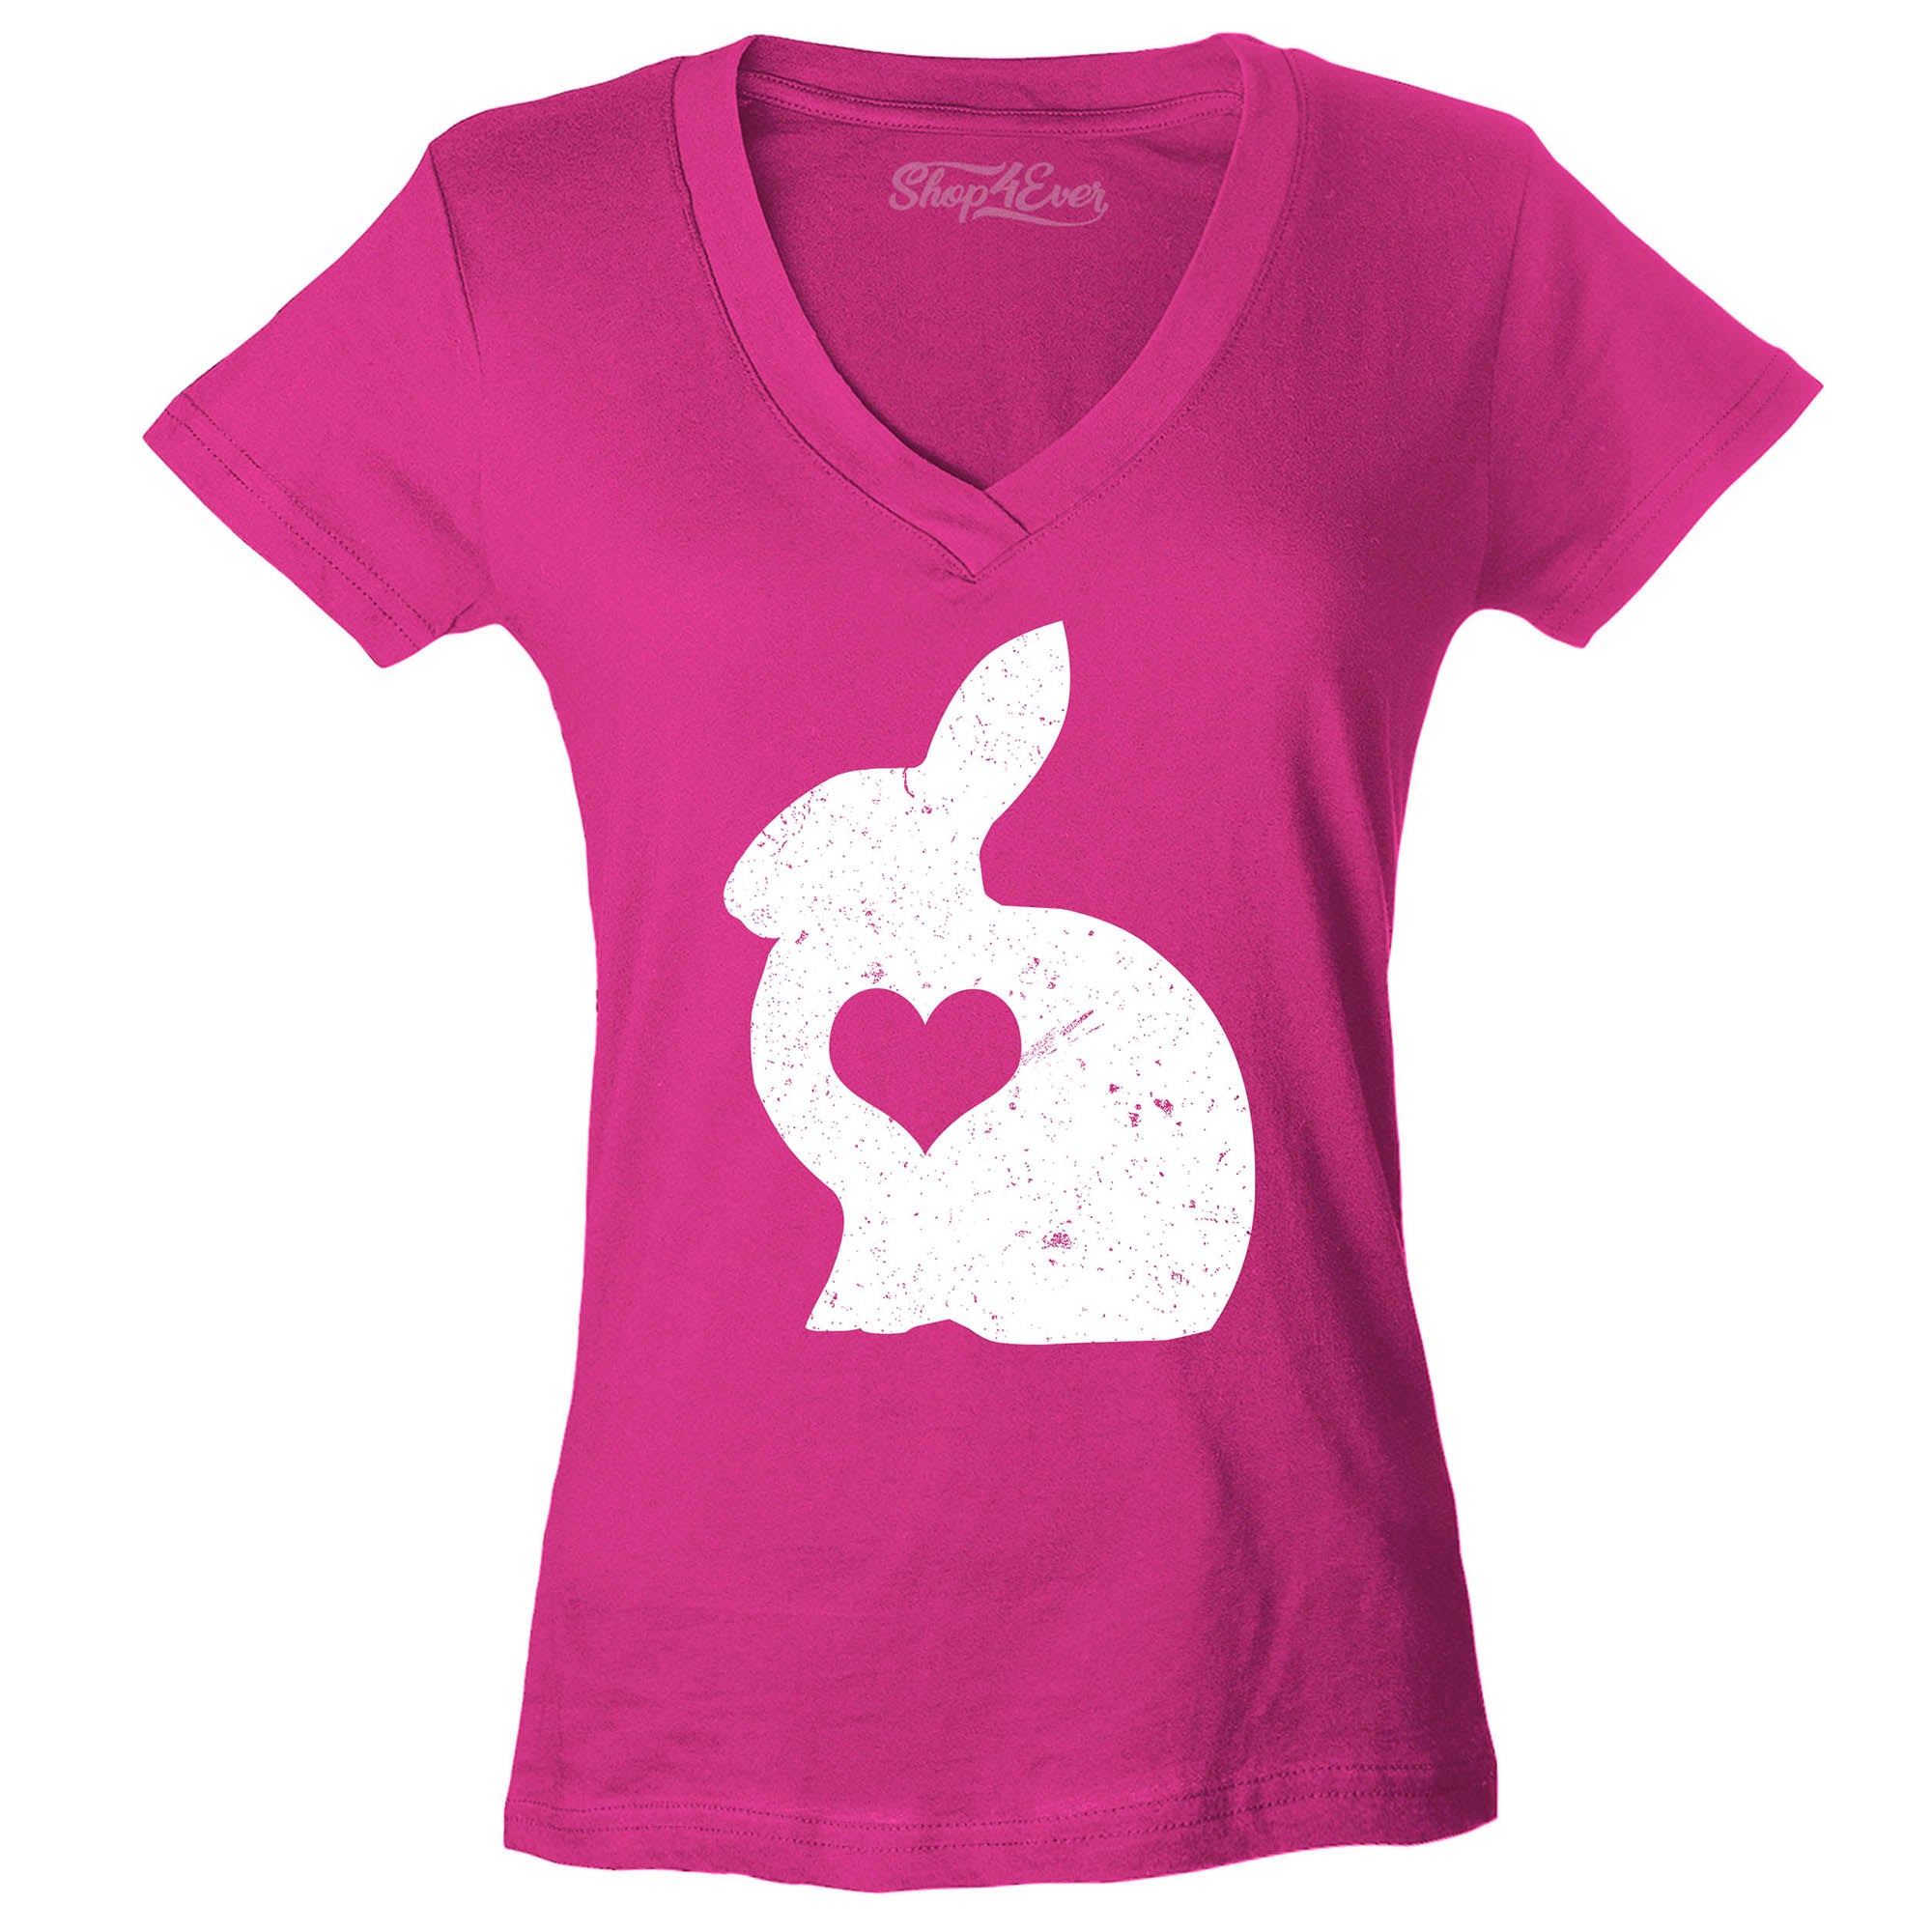 Easter Bunny Rabbit with Heart Women's V-Neck T-Shirt Slim Fit